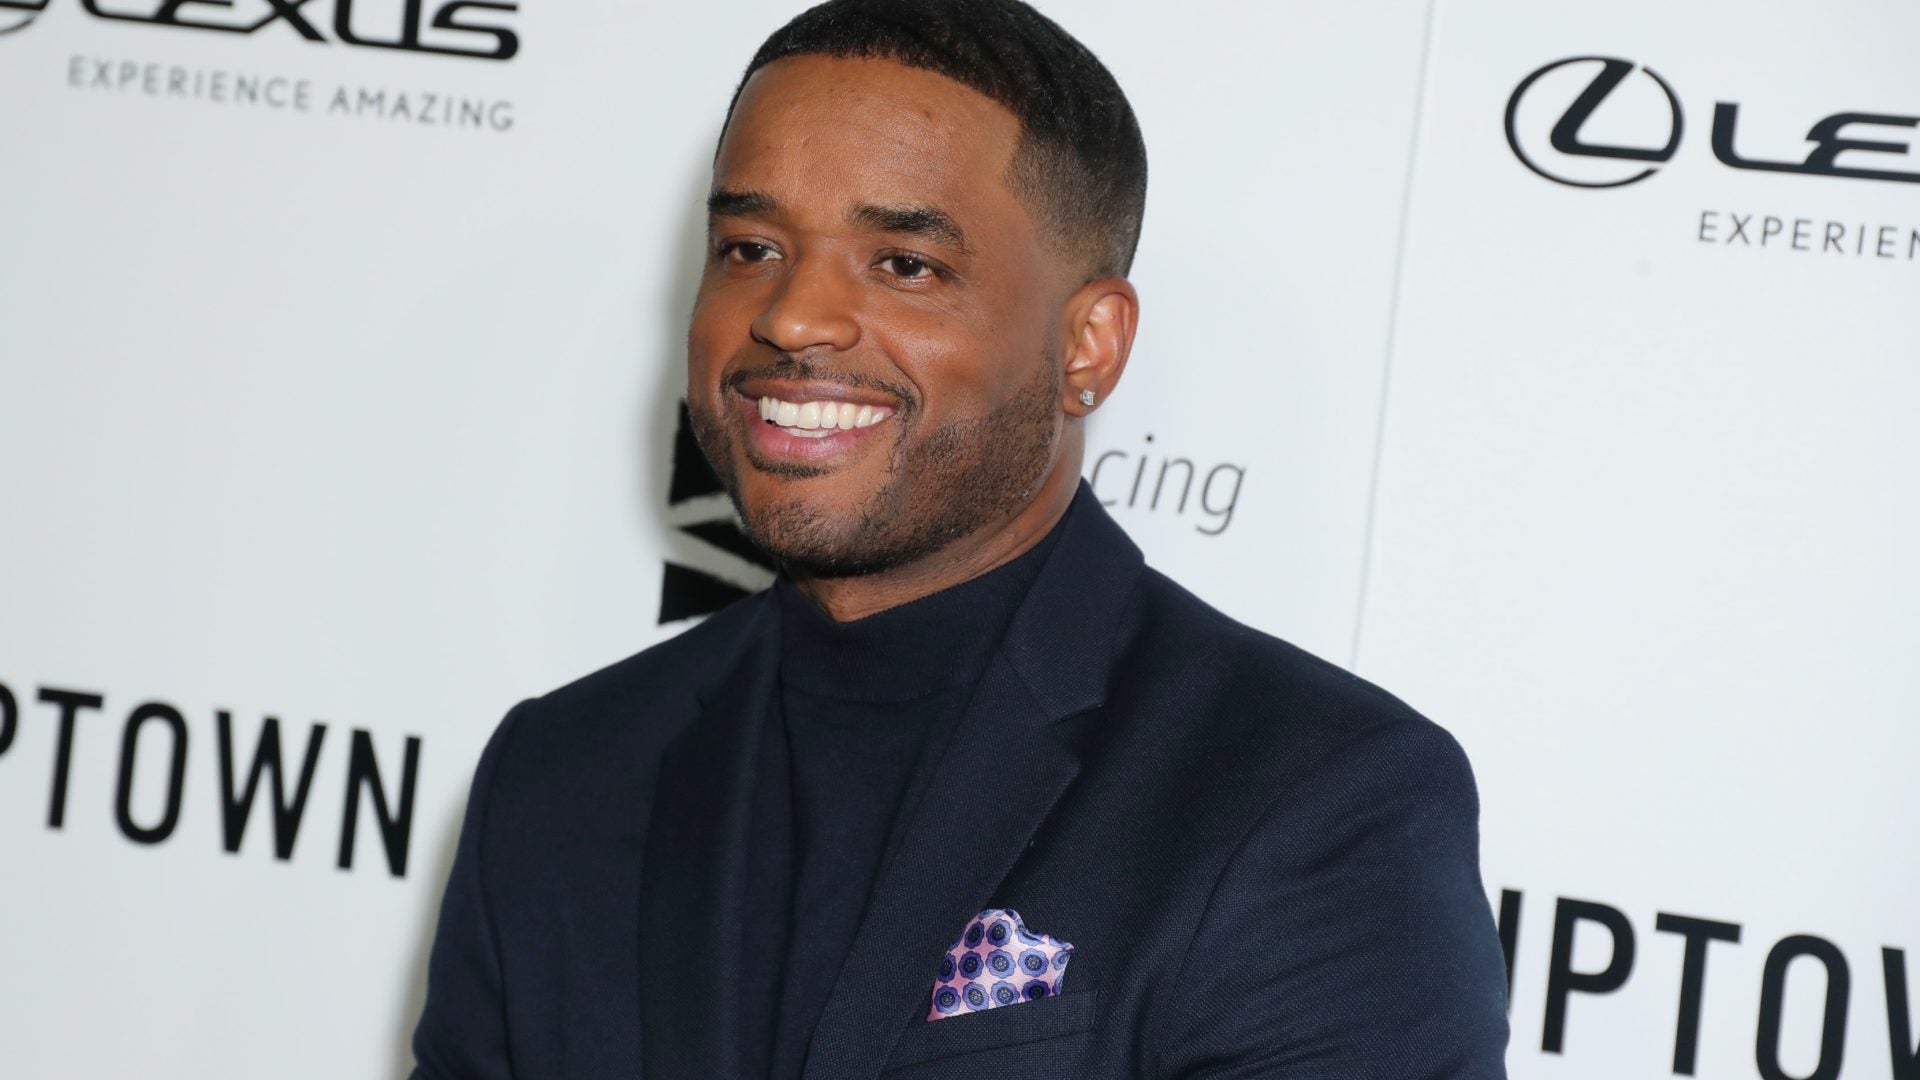 Larenz Tate Talks Playing The Bad Guy, Working With His Brother, And 30 Years of Sex Symbol Status